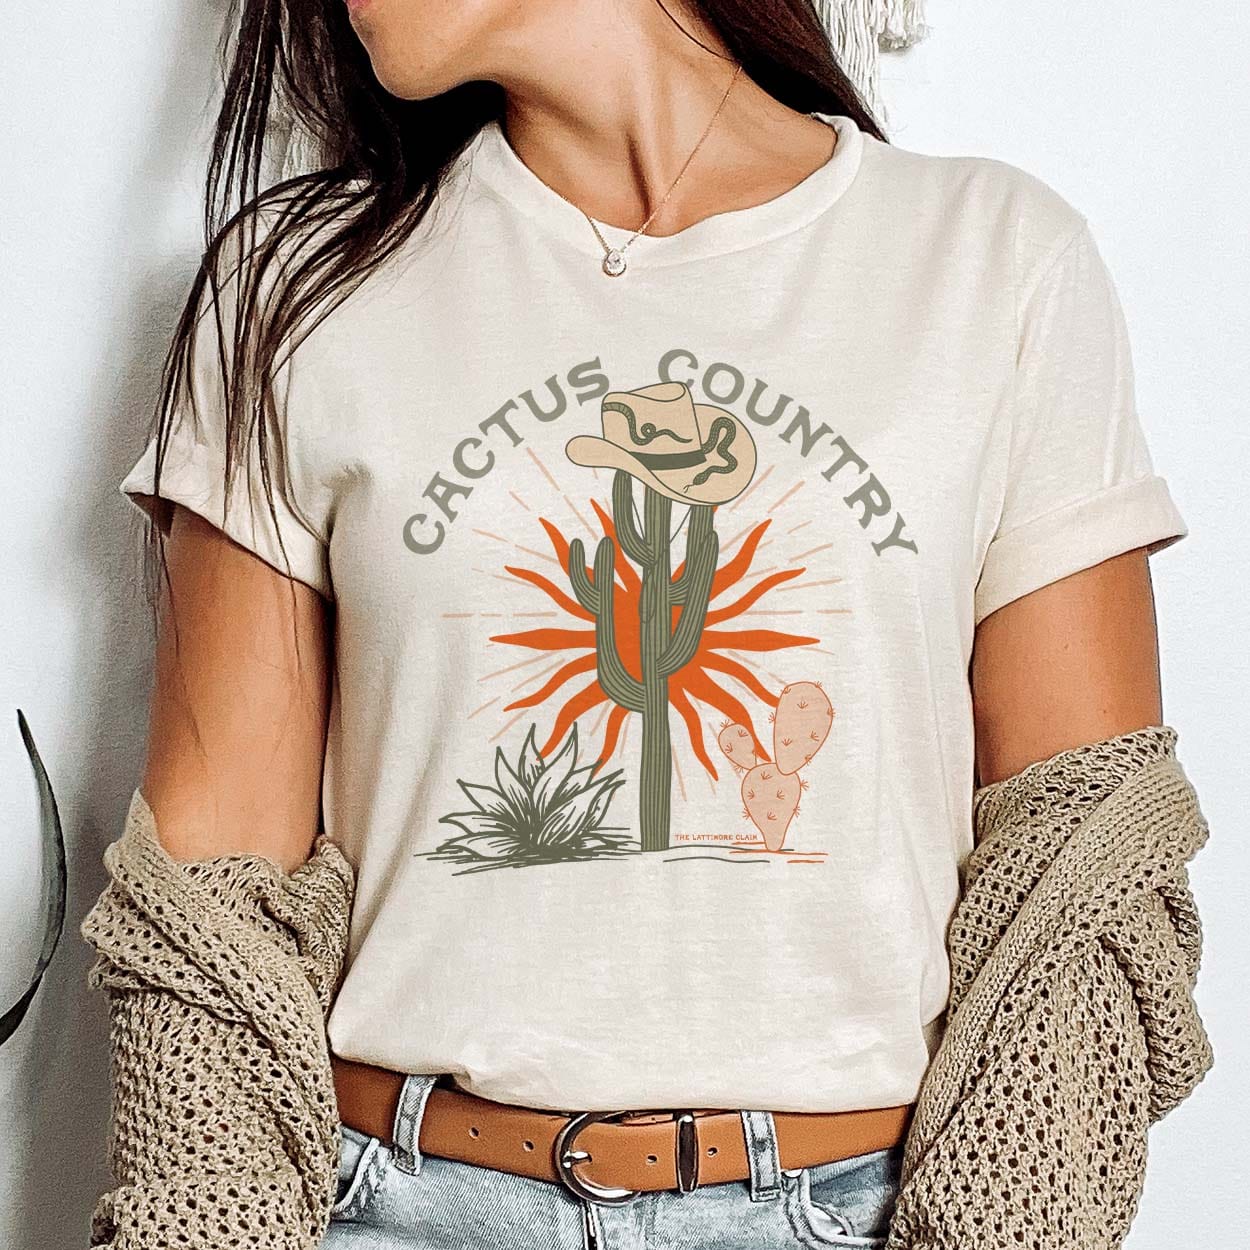 A cream colored short sleeve tee with cuffed sleeves, a graphic of a cactus wearing a tan cowboy hat with a snake, a little orange cactus, green foliage, an orange sun behind the cacti, and the words "cactus country" above the graphic. Item is pictured on a plain white background.